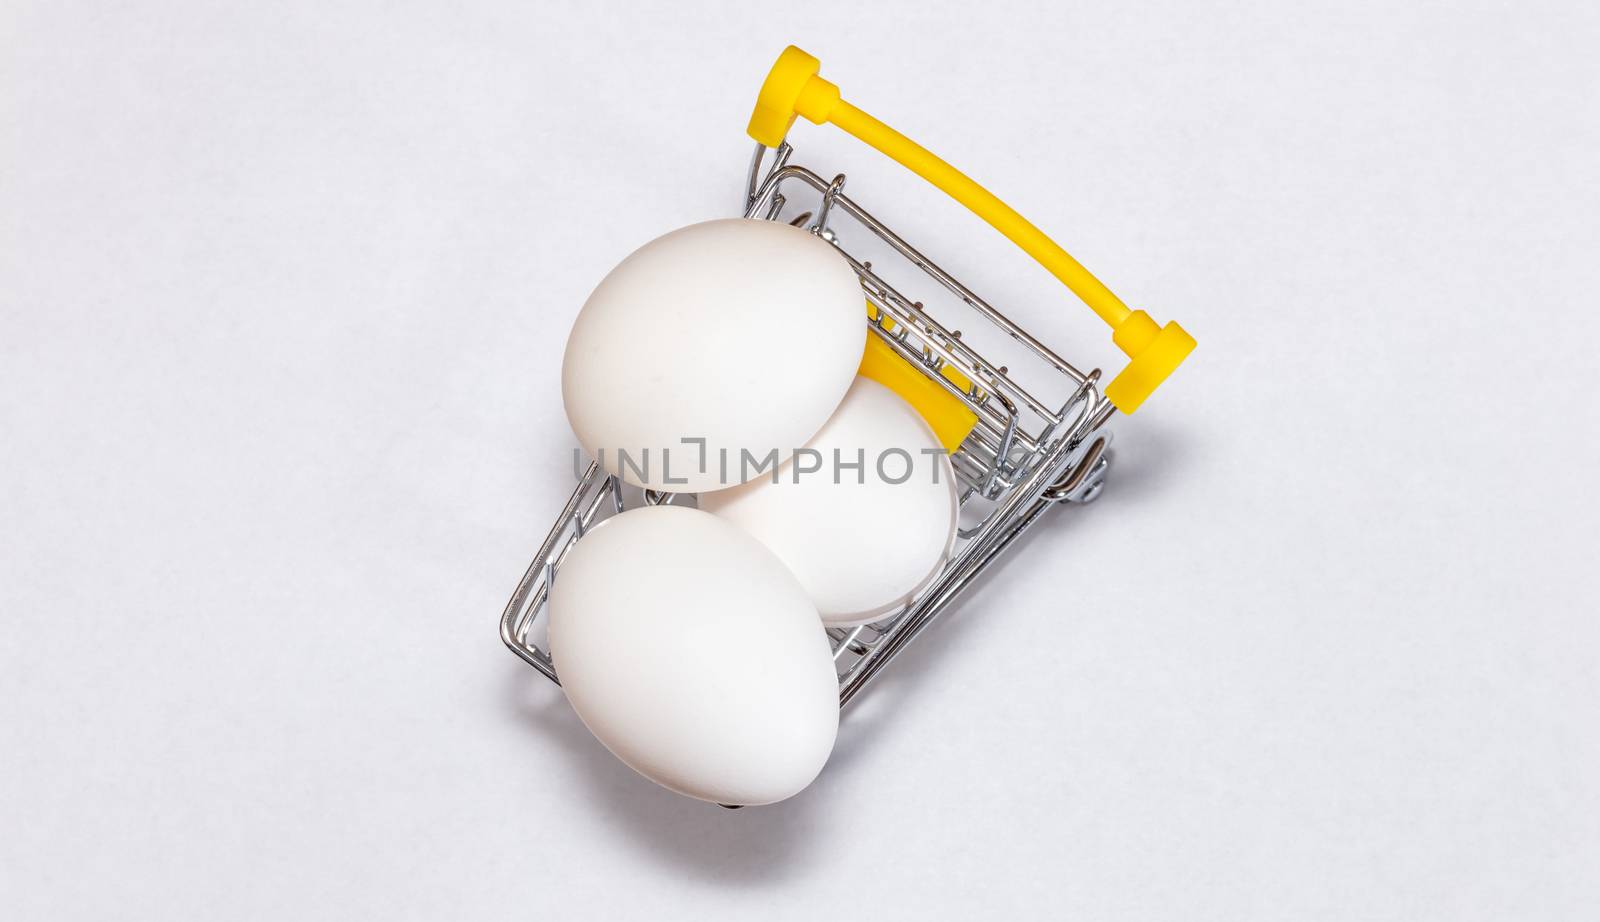 Fresh eggs in a shopping cart. Top view. Shopping, purchasing, and food delivery concept. Copy space. by DamantisZ